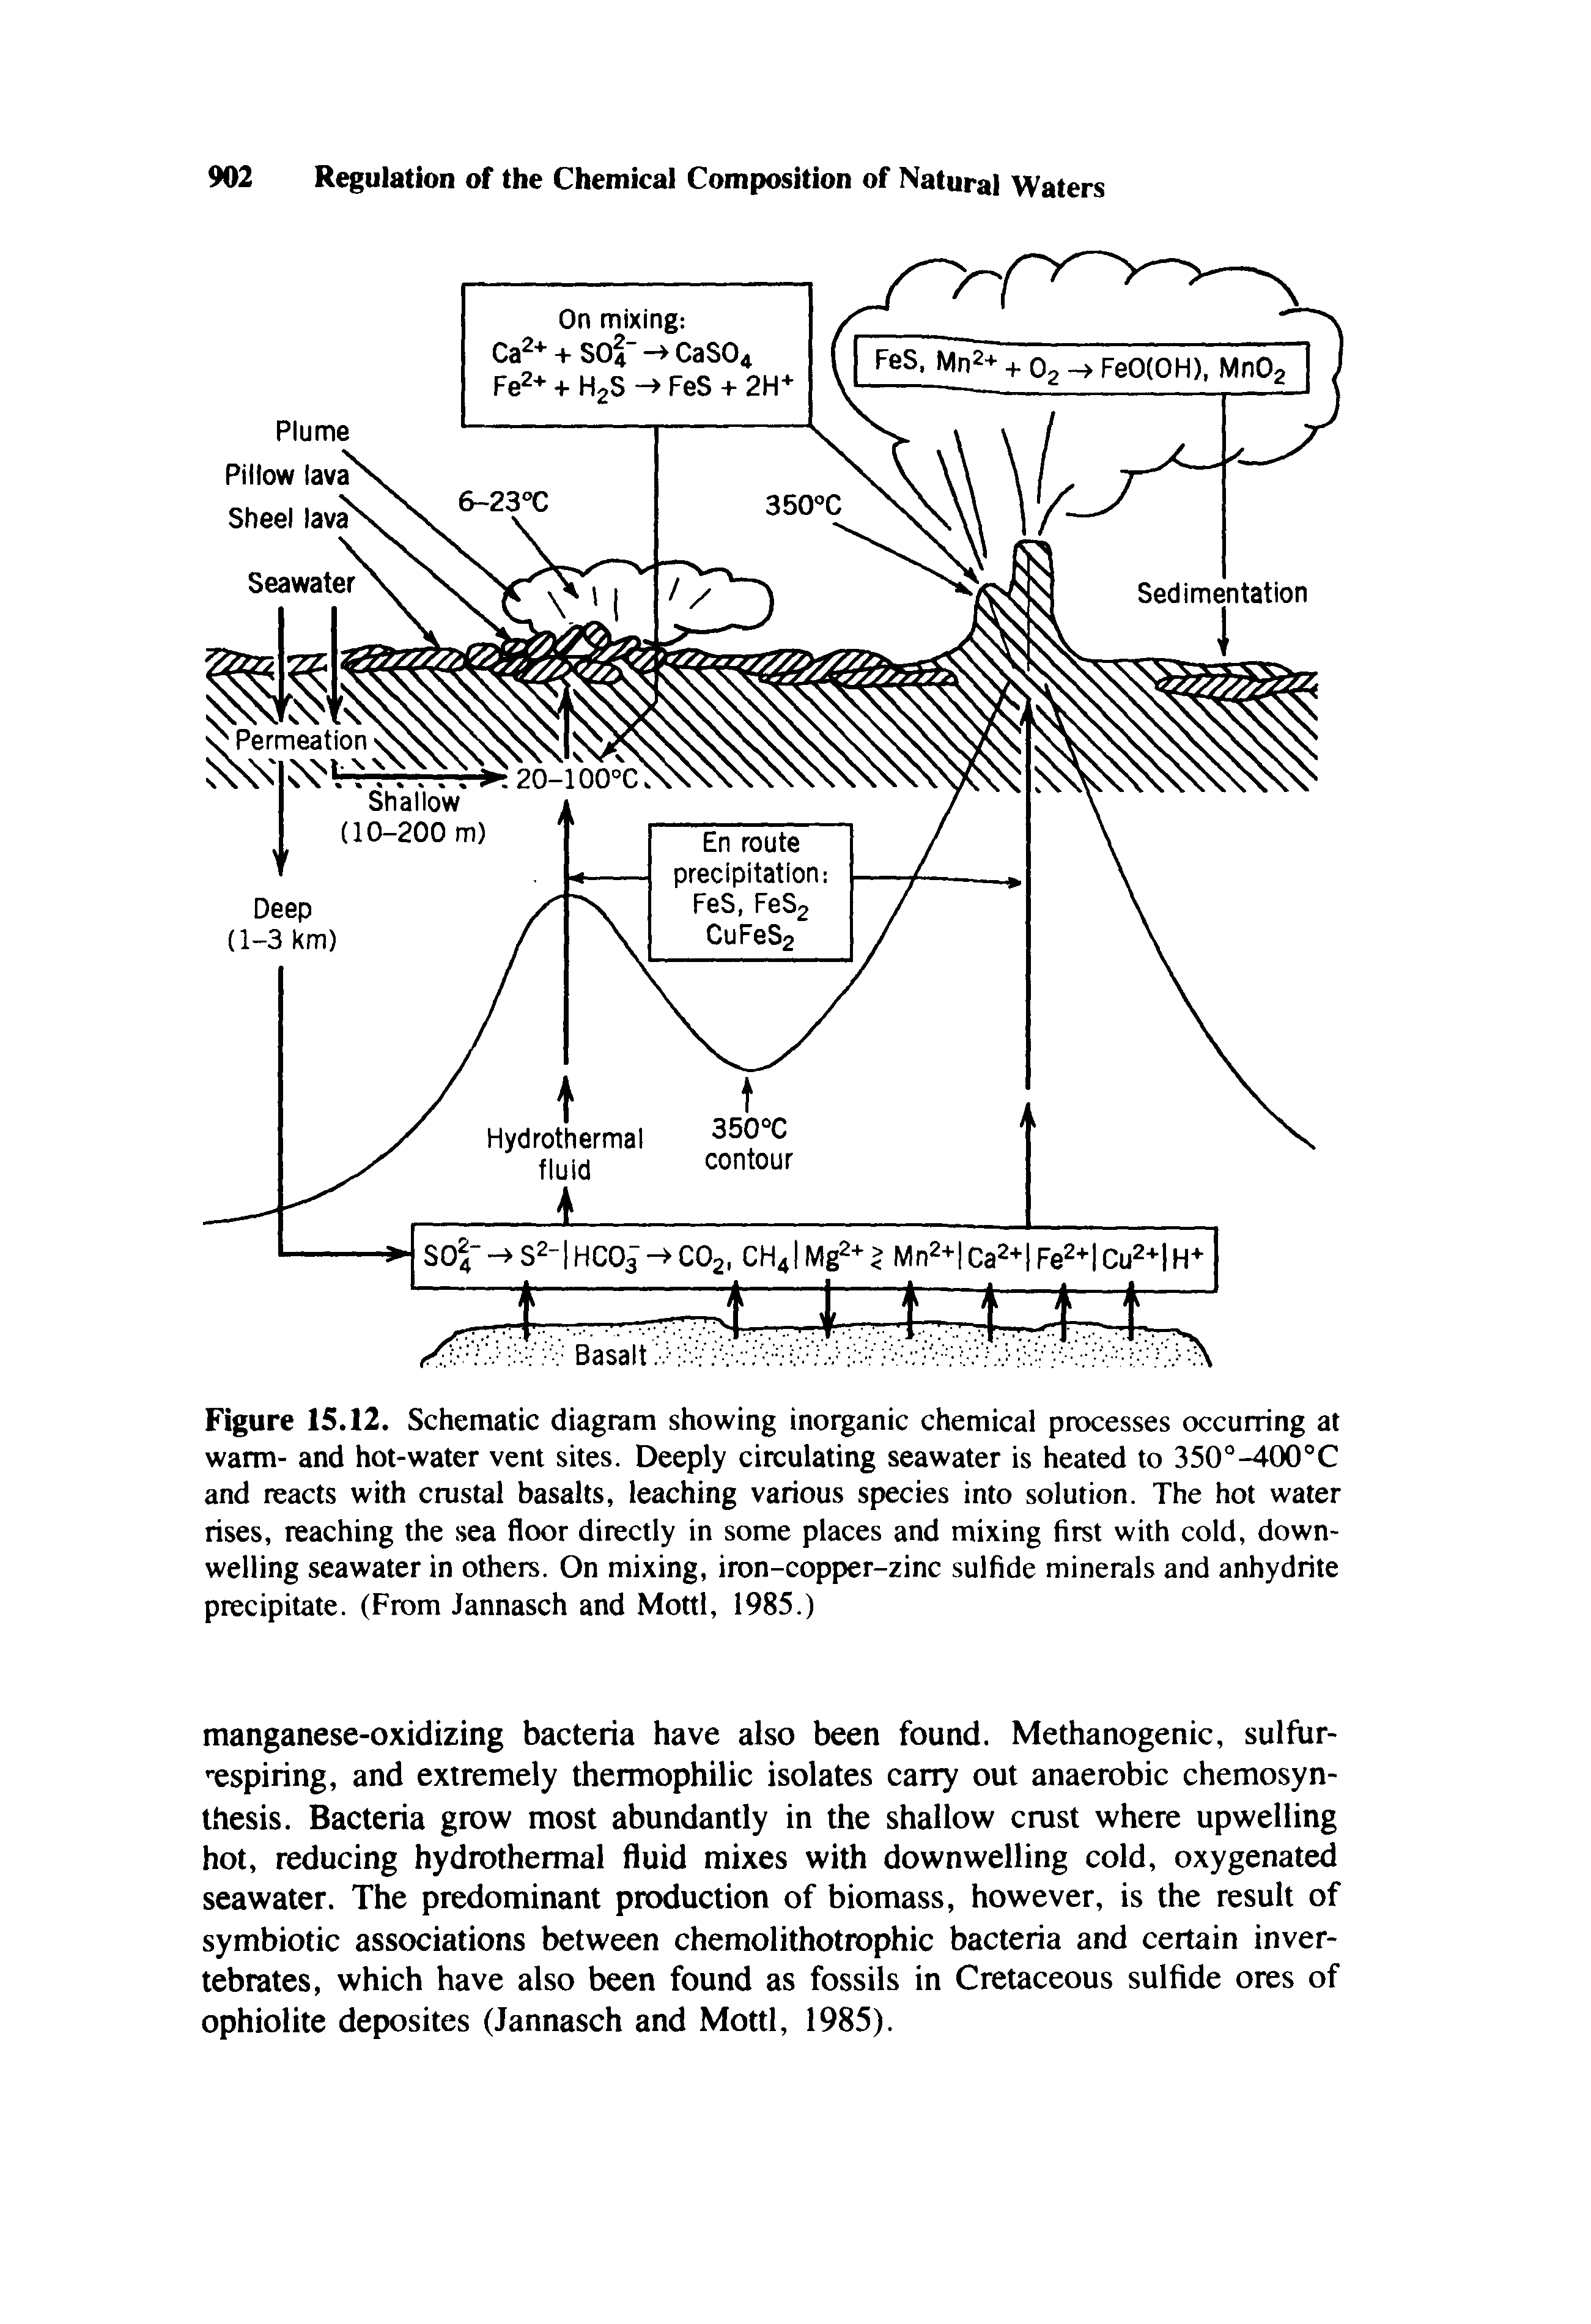 Figure 15.12. Schematic diagram showing inorganic chemical processes occurring at warm- and hot-water vent sites. Deeply circulating seawater is heated to 350°-400°C and reacts with crustal basalts, leaching various species into solution. The hot water rises, reaching the sea floor directly in some places and mixing first with cold, down-welling seawater in others. On mixing, iron-copper-zinc sulfide minerals and anhydrite precipitate. (From Jannasch and Mottl, 1985.)...